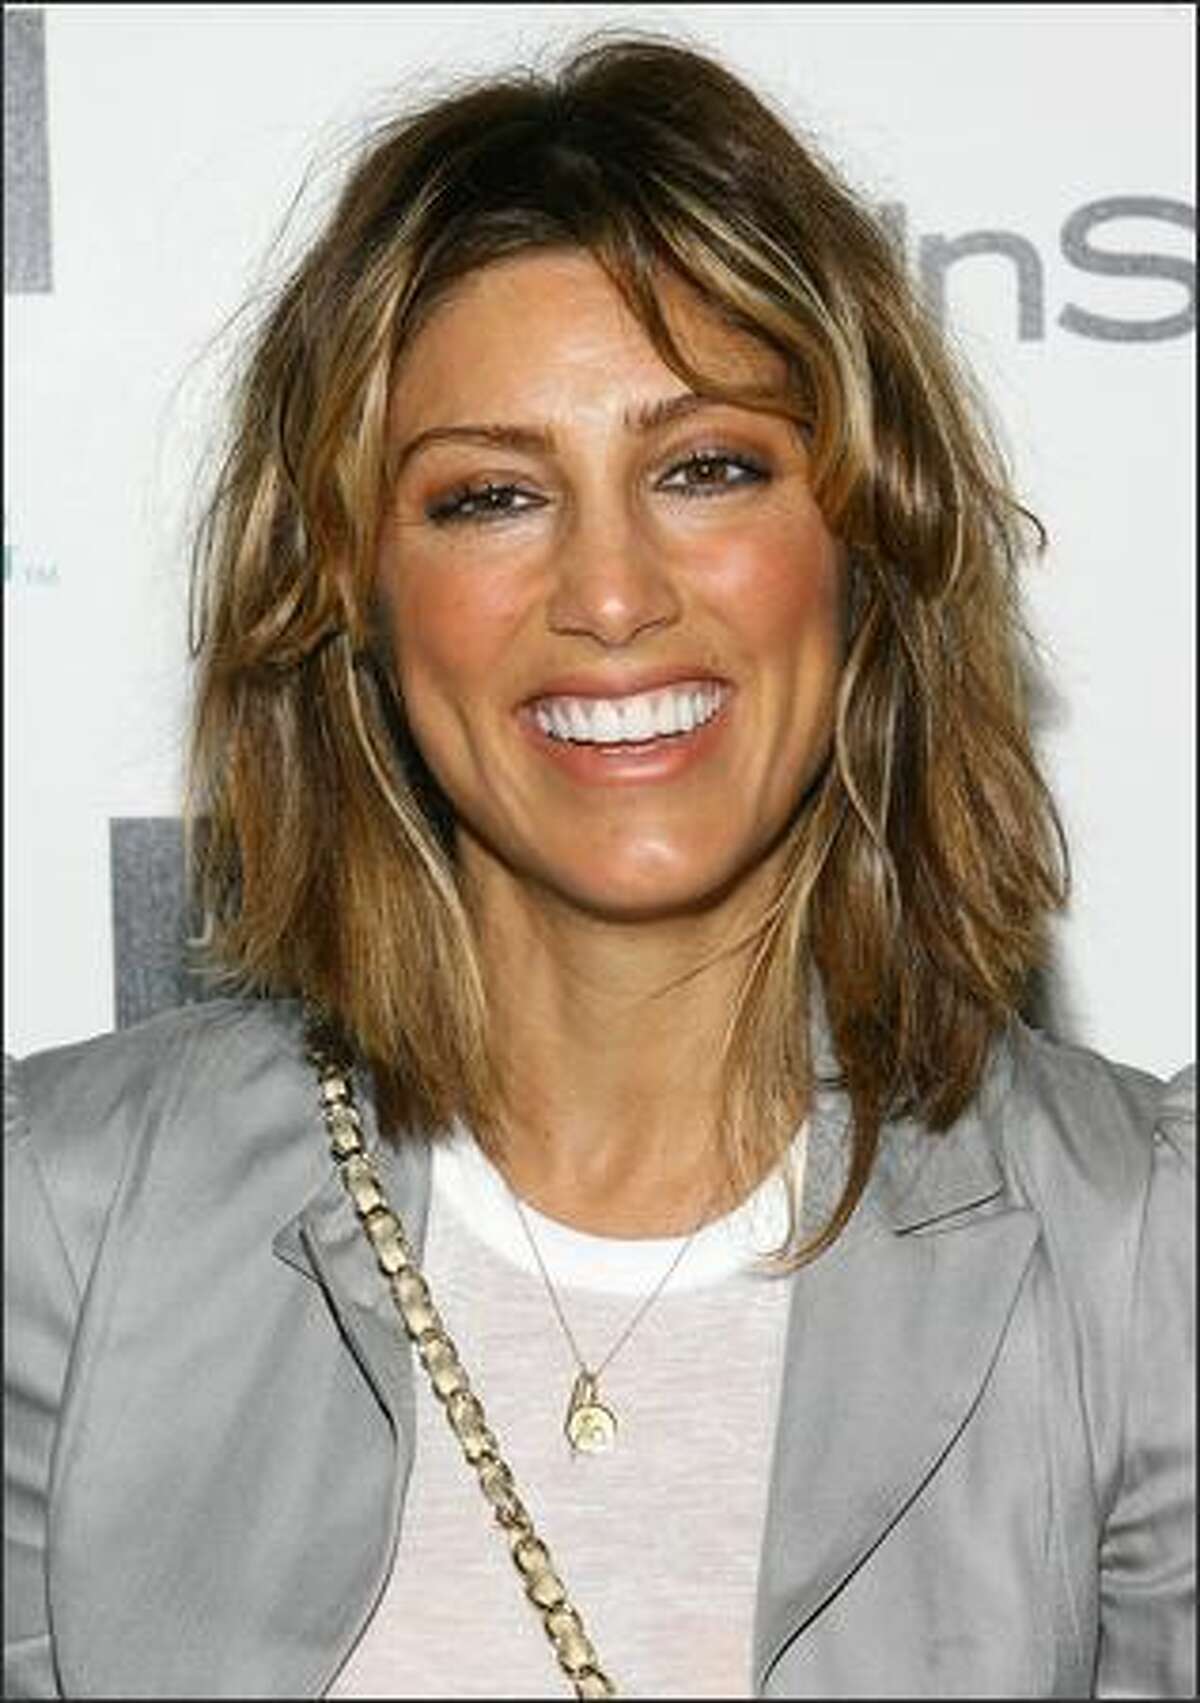 Actress Jennifer Esposito attends the InStyle Hair Issue launch party hosted by John Frieda Root Awakening at Hotel Gansevoort in New York City.KEEP CLICKING FOR MORE PHOTOS OF ESPOSITO THROUGH THE YEARS.